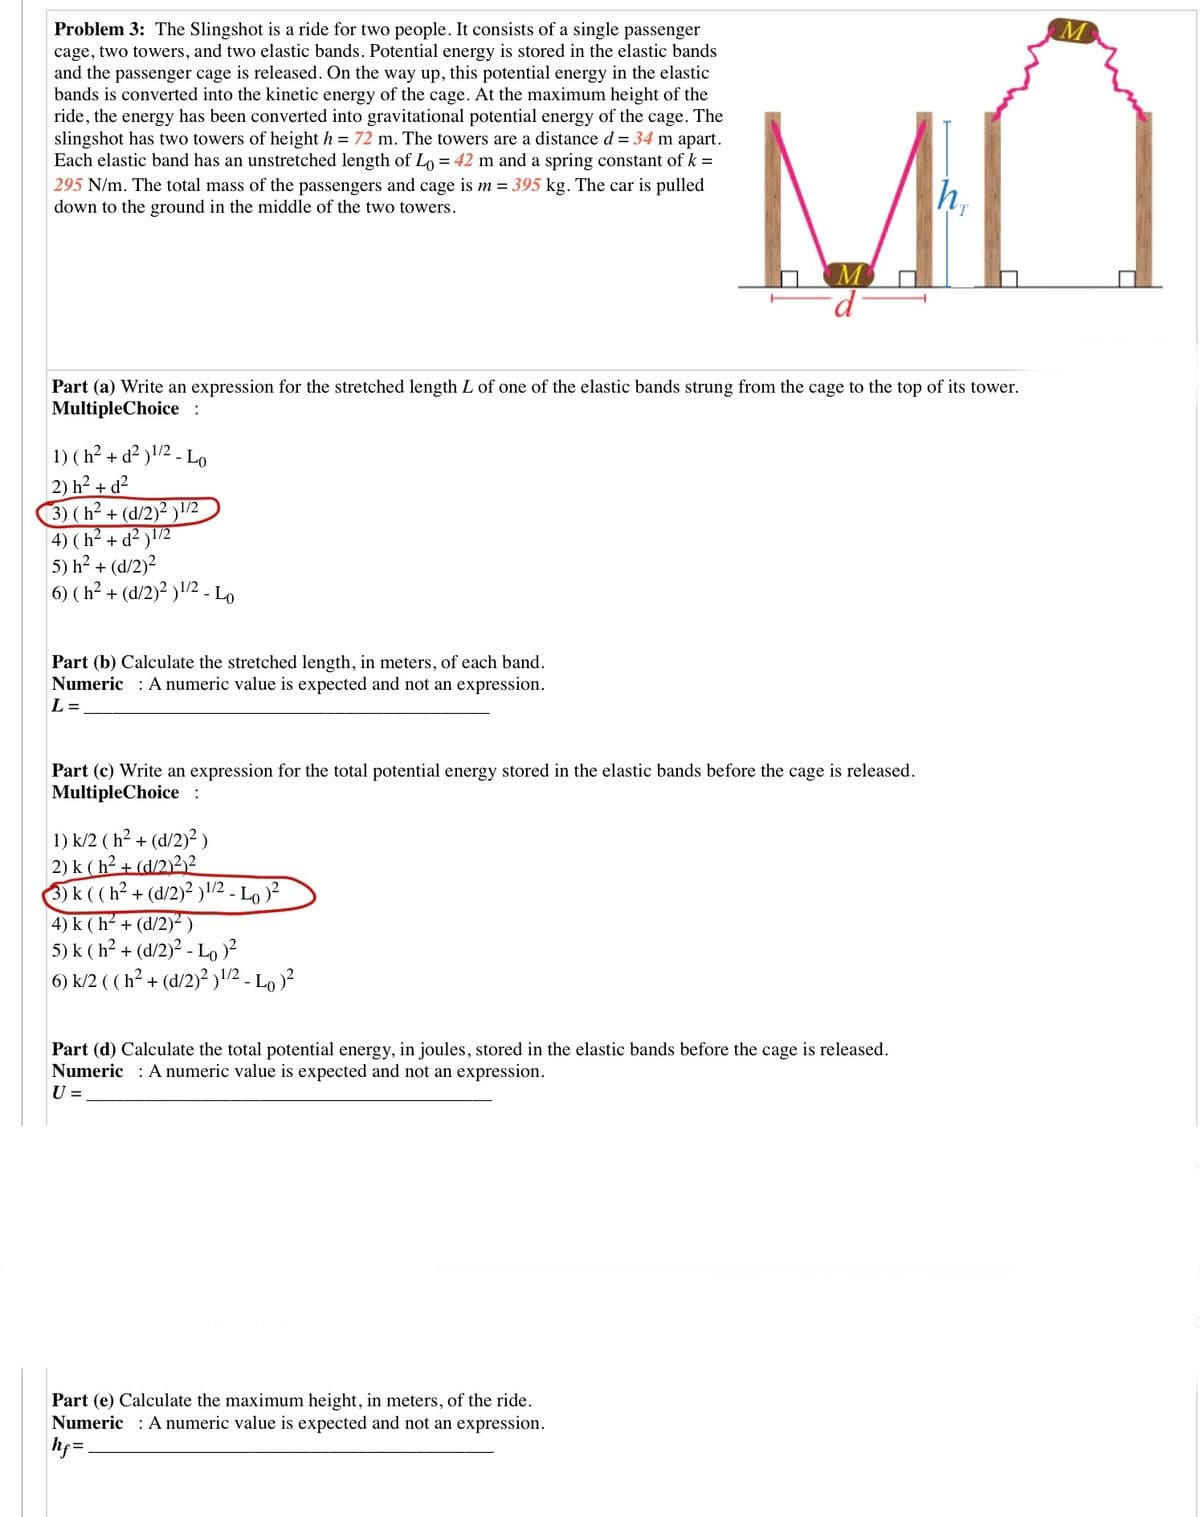 M
Problem 3: The Slingshot is a ride for two people. It consists of a single passenger
cage, two towers, and two elastic bands. Potential energy is stored in the elastic bands
and the passenger cage is released. On the way up, this potential energy in the elastic
bands is converted into the kinetic energy of the cage. At the maximum height of the
ride, the energy has been converted into gravitational potential energy of the cage. The
slingshot has two towers of height h = 72 m. The towers are a distance d= 34 m apart.
Each elastic band has an unstretched length of Lo = 42 m and a spring constant of k =
295 N/m. The total mass of the passengers and cage is m = 395 kg. The car is pulled
down to the ground in the middle of the two towers.
h,
Part (a) Write an expression for the stretched length L of one of the elastic bands strung from the cage to the top of its tower.
MultipleChoice :
1) (h² + d² )!/2 - Lo
2) h² + d²
3) (h² + (d/2)² )!'2
4) ( h² + d² )\l/2
5) h? + (d/2)?
6) (h² + (d/2)² )!/2 - Lo
Part (b) Calculate the stretched length, in meters, of each band.
Numeric : A numeric value is expected and not an expression.
L =
Part (c) Write an expression for the total potential energy stored in the elastic bands before the cage is released.
MultipleChoice :
1) k/2 ( h² + (d/2)?)
2) k ( h² + (d/2)2)²
3k((h²+ (d/2)? )/2 - Lo )²
4) k (h² + (d/2)² )
5) k ( h? + (d/2)² - Lo)?
6) k/2 ( ( h² + (d/2)² )1/2 - Lo )²
Part (d) Calculate the total potential energy, in joules, stored in the elastic bands before the cage is released.
Numeric : A numeric value is expected and not an expression.
U =
Part (e) Calculate the maximum height, in meters, of the ride.
Numeric : A numeric value is expected and not an expression.
hf =,
